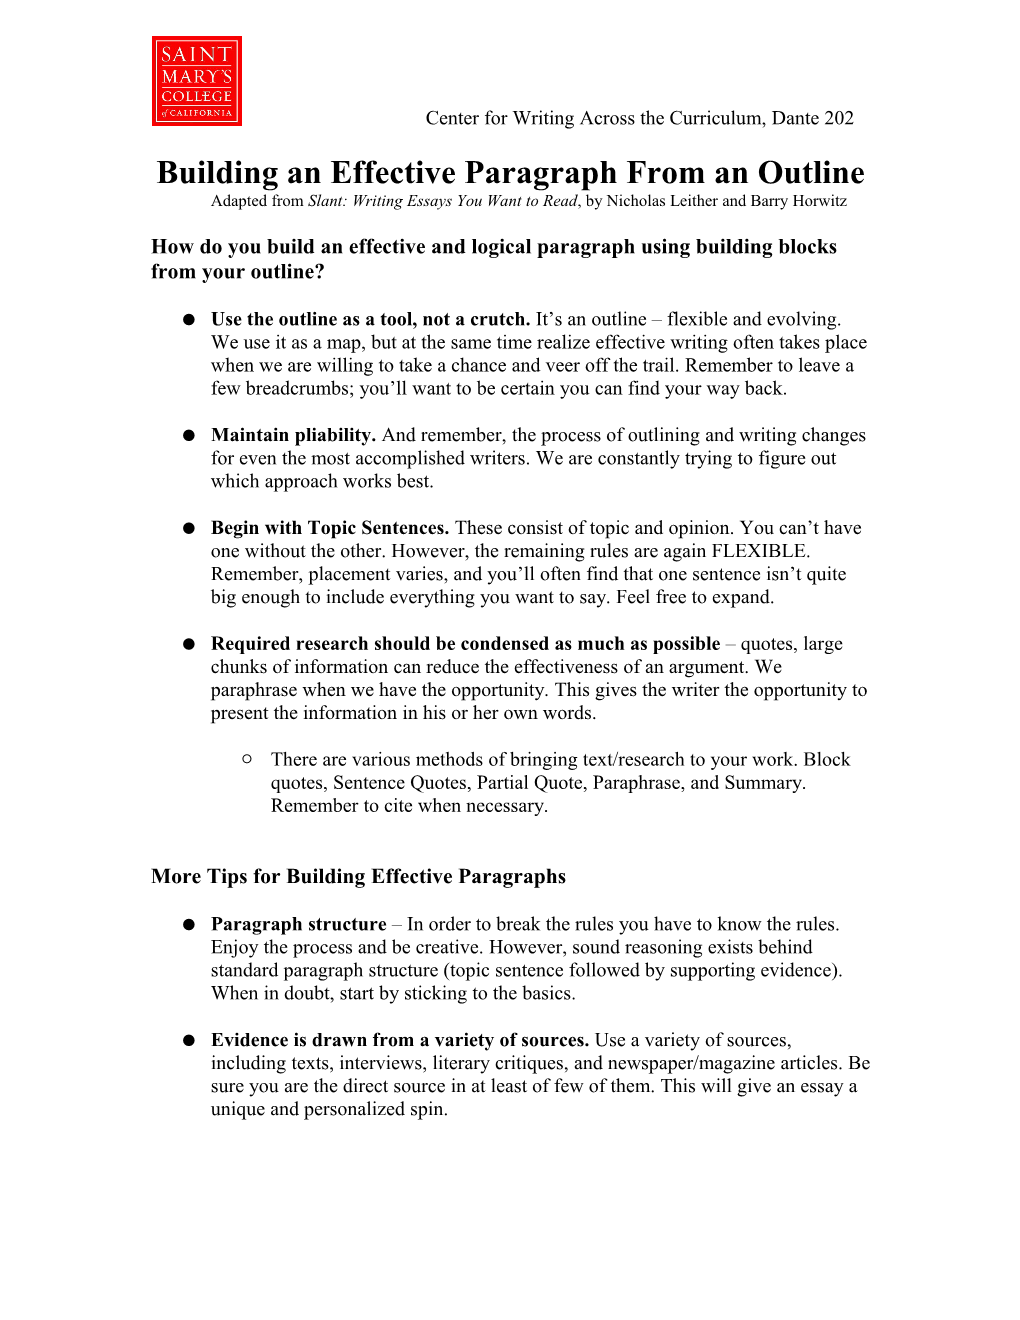 Copy of Building an Effective Paragraph from an Outline